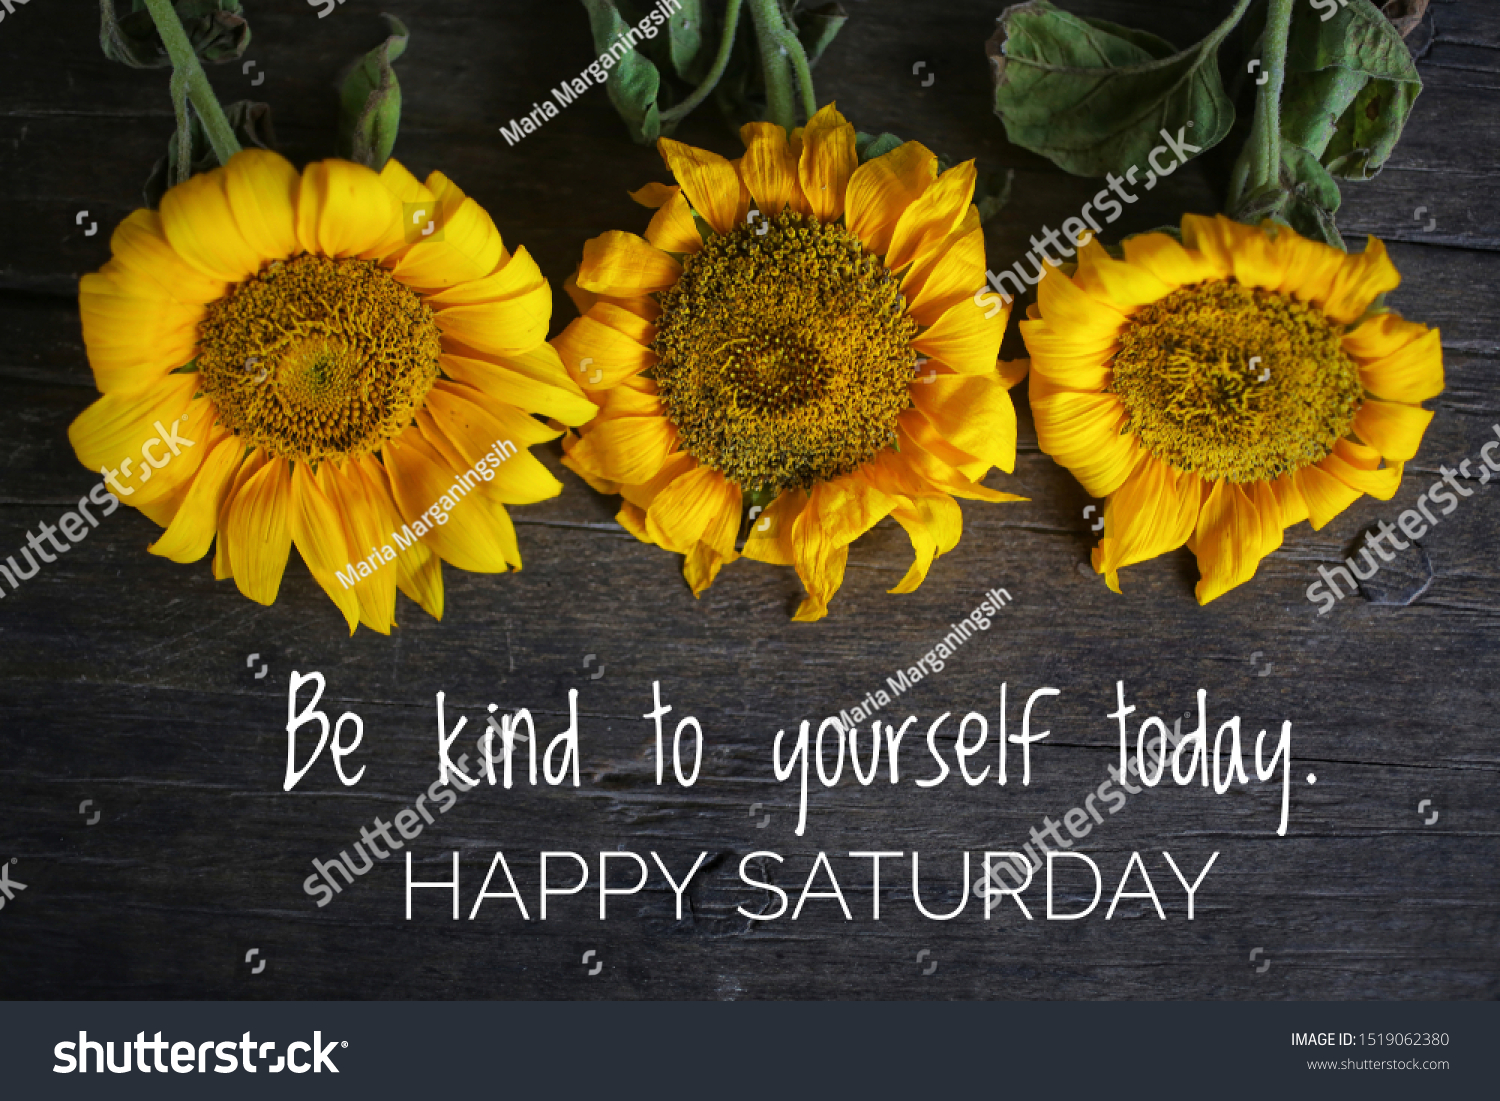 Inspirational motivational quote - Be kind to yourself today. With 3 beautiful sunflowers on rustic wooden table background. Self reminder, happy Saturday greeting concept. #1519062380